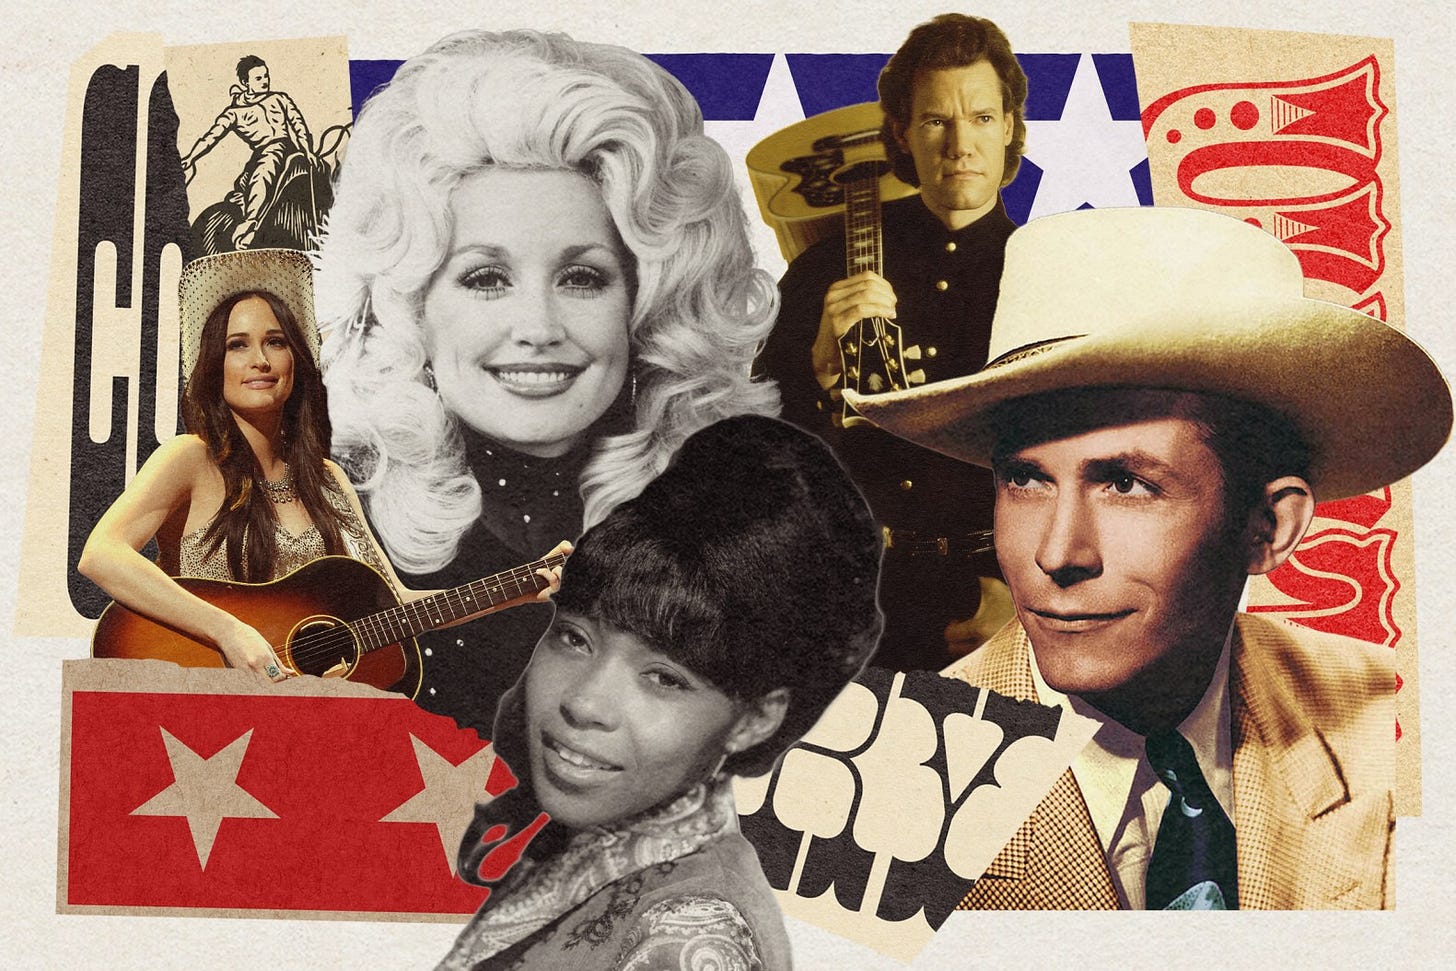 The 200 Greatest Country Songs of All Time dolly parton jolene kacey musgraves linda martell hank williams randy travis yee haw honky tonk